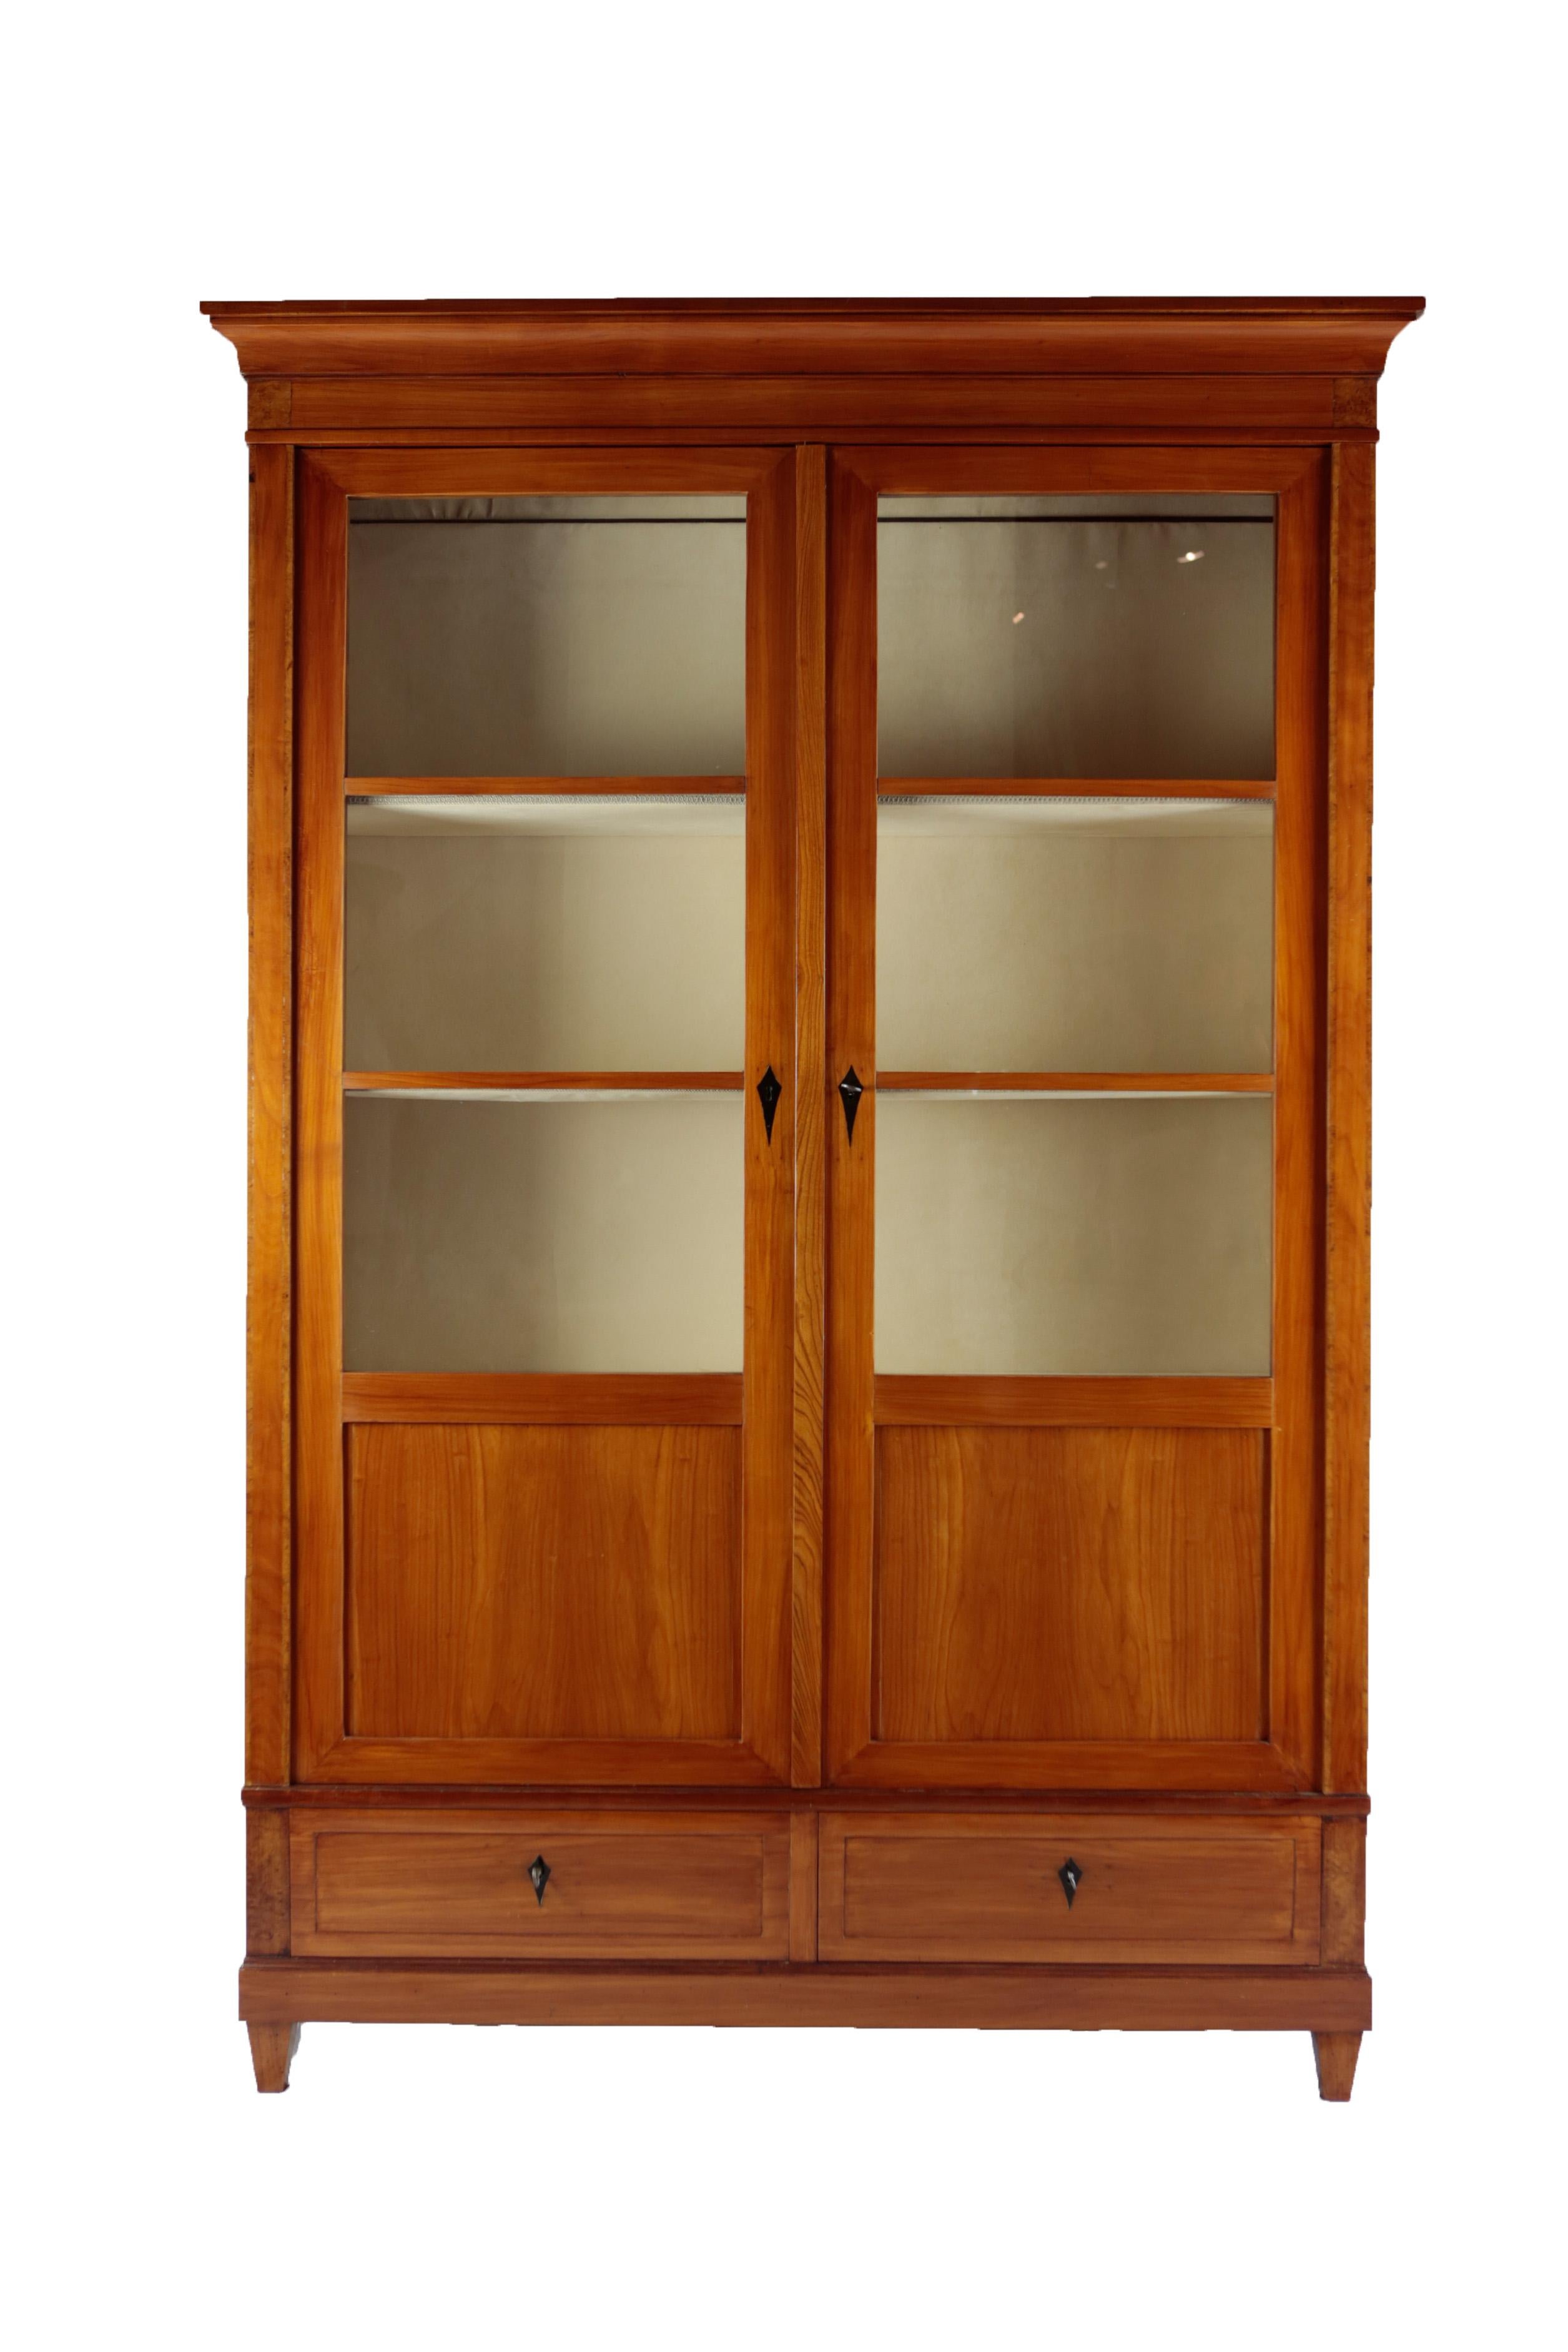 Beautiful 19th century glass cabinet with two doors and inner shelving. The 3 shelves are coated with a soft but durable fabric. 
This french piece of craftmanship with two drawers was build around 1850/60 of Cherrywood. The vitrine is in restored